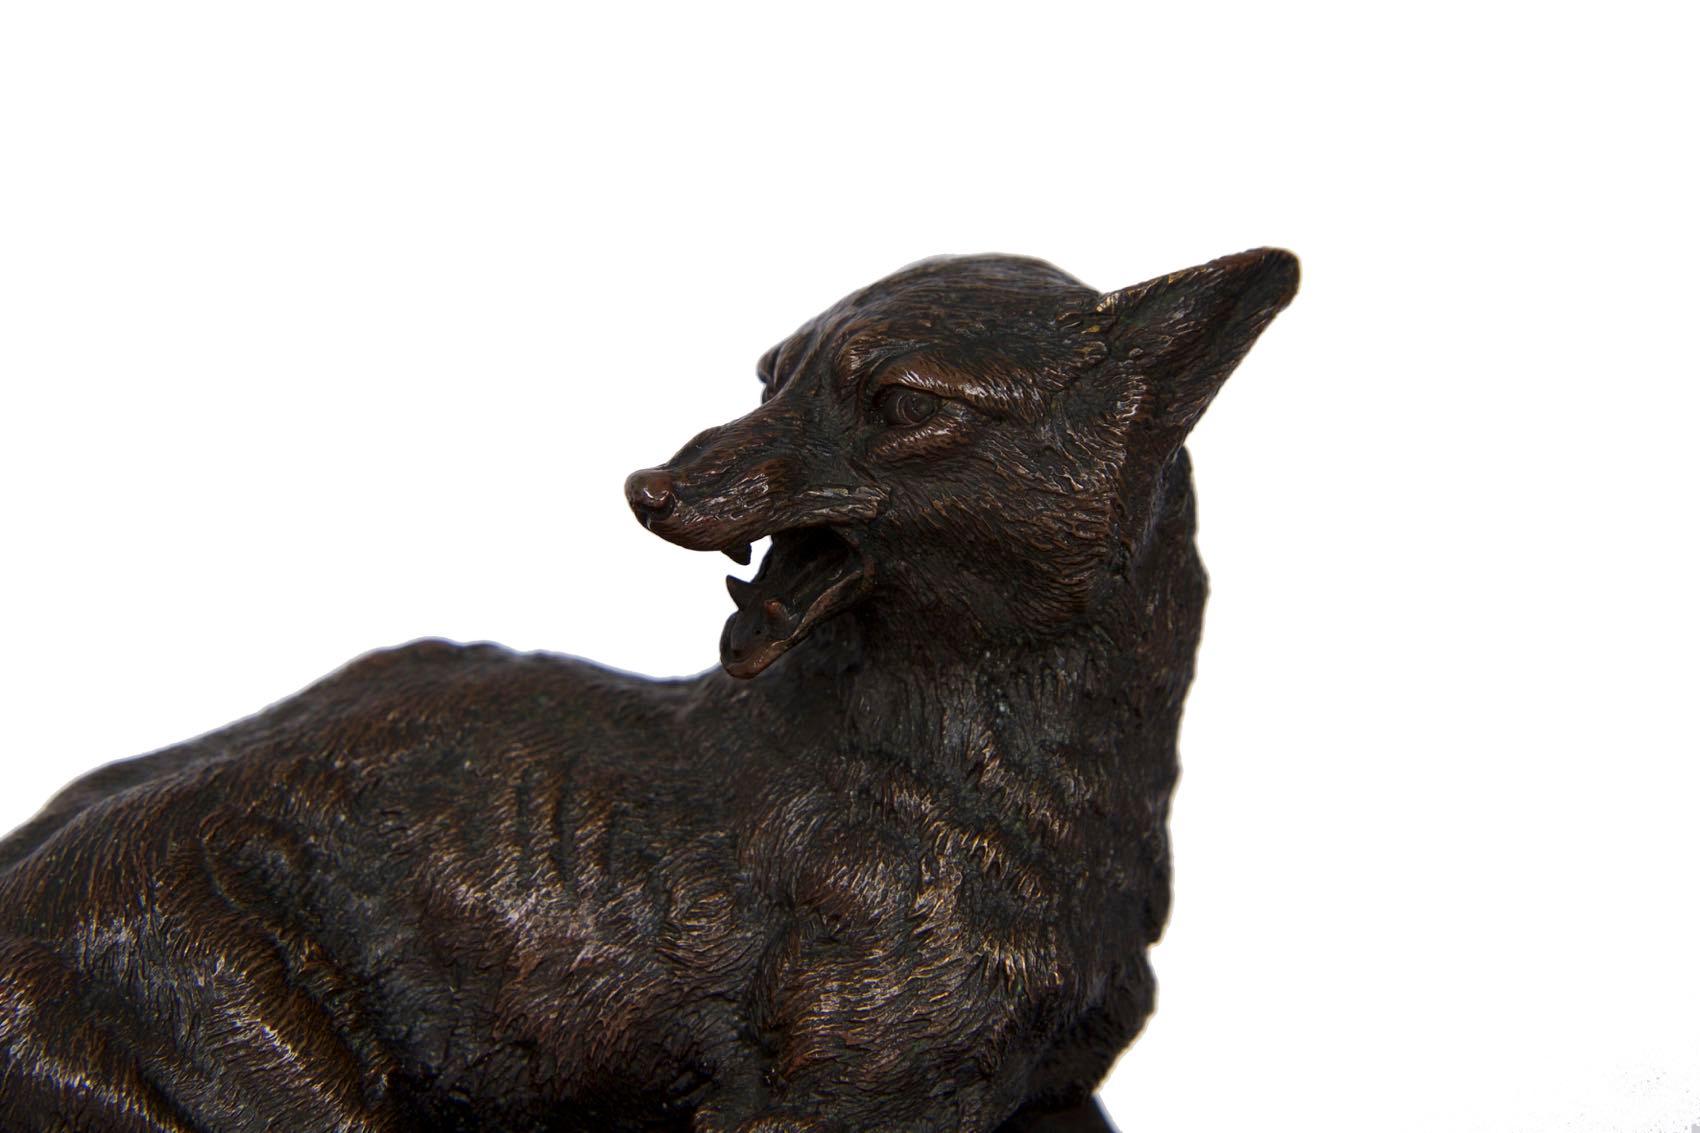 A rare and exceptionally well detailed model of a trapped fox, it is an expertly cast work that beautifully depicts this fear and surprise in the features of the captured creature. Always a realist and never Romantic, his animals are anatomically